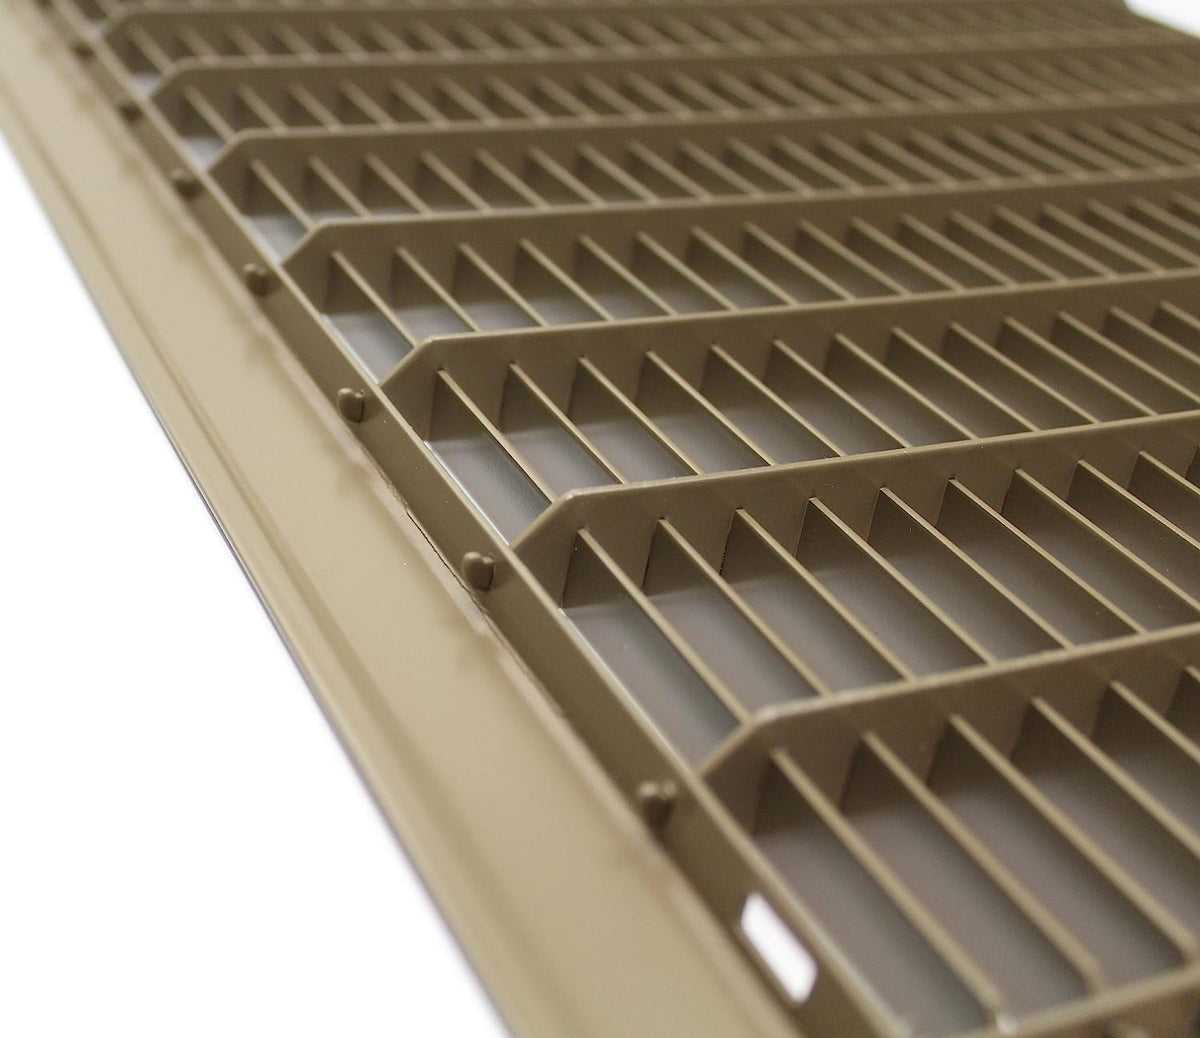 20&quot; X 26&quot; Or 26&quot; X 20&quot; Heavy Duty Floor Grille - Fixed Blades Air Grille - Brown [Outer Dimensions: 21.75 X 27.75]